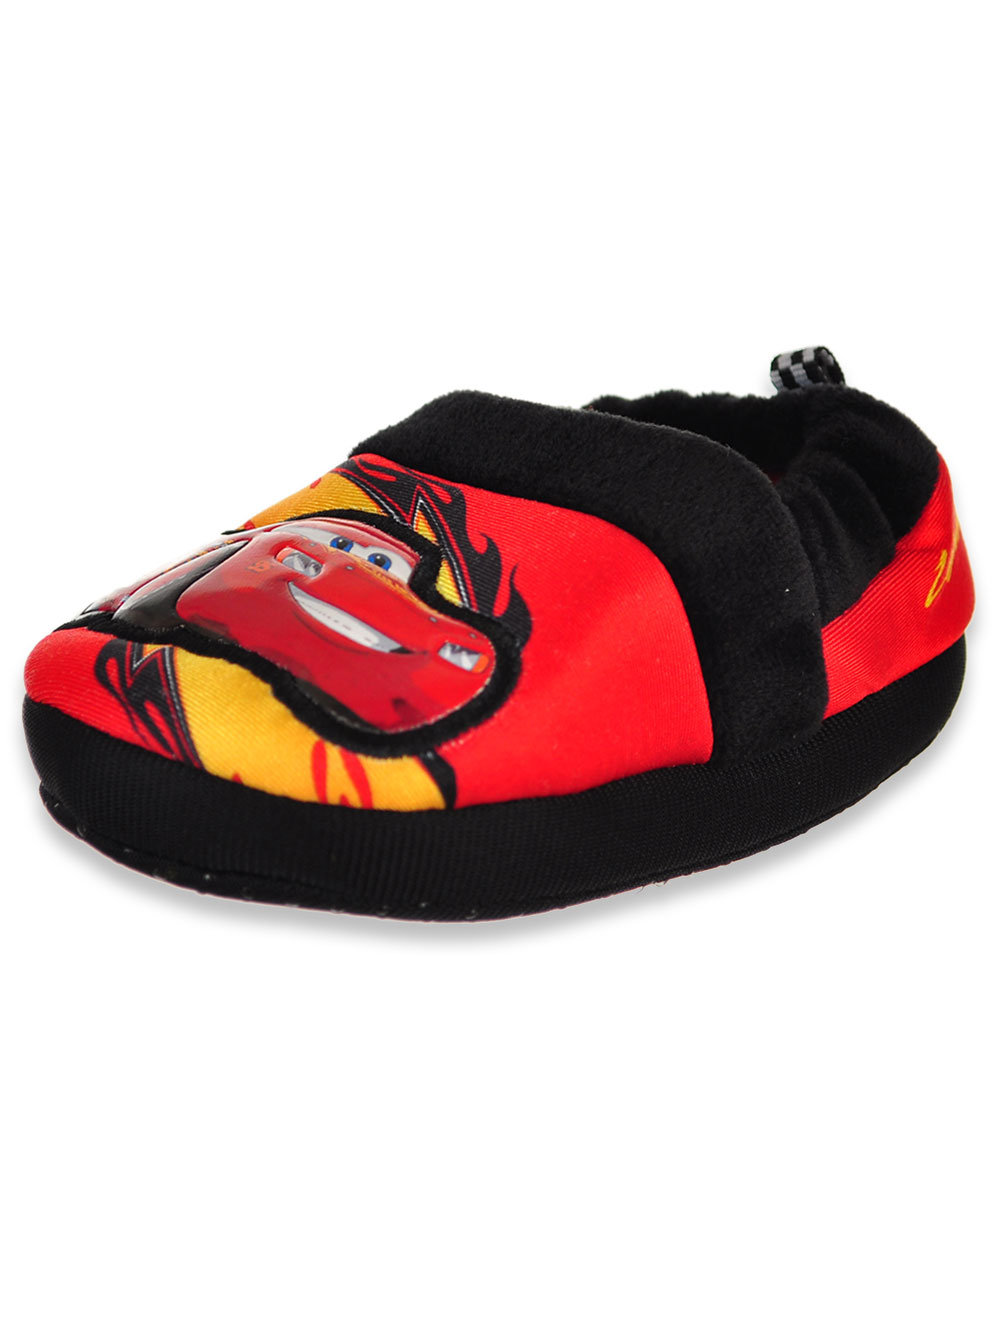 disney cars slippers for toddlers